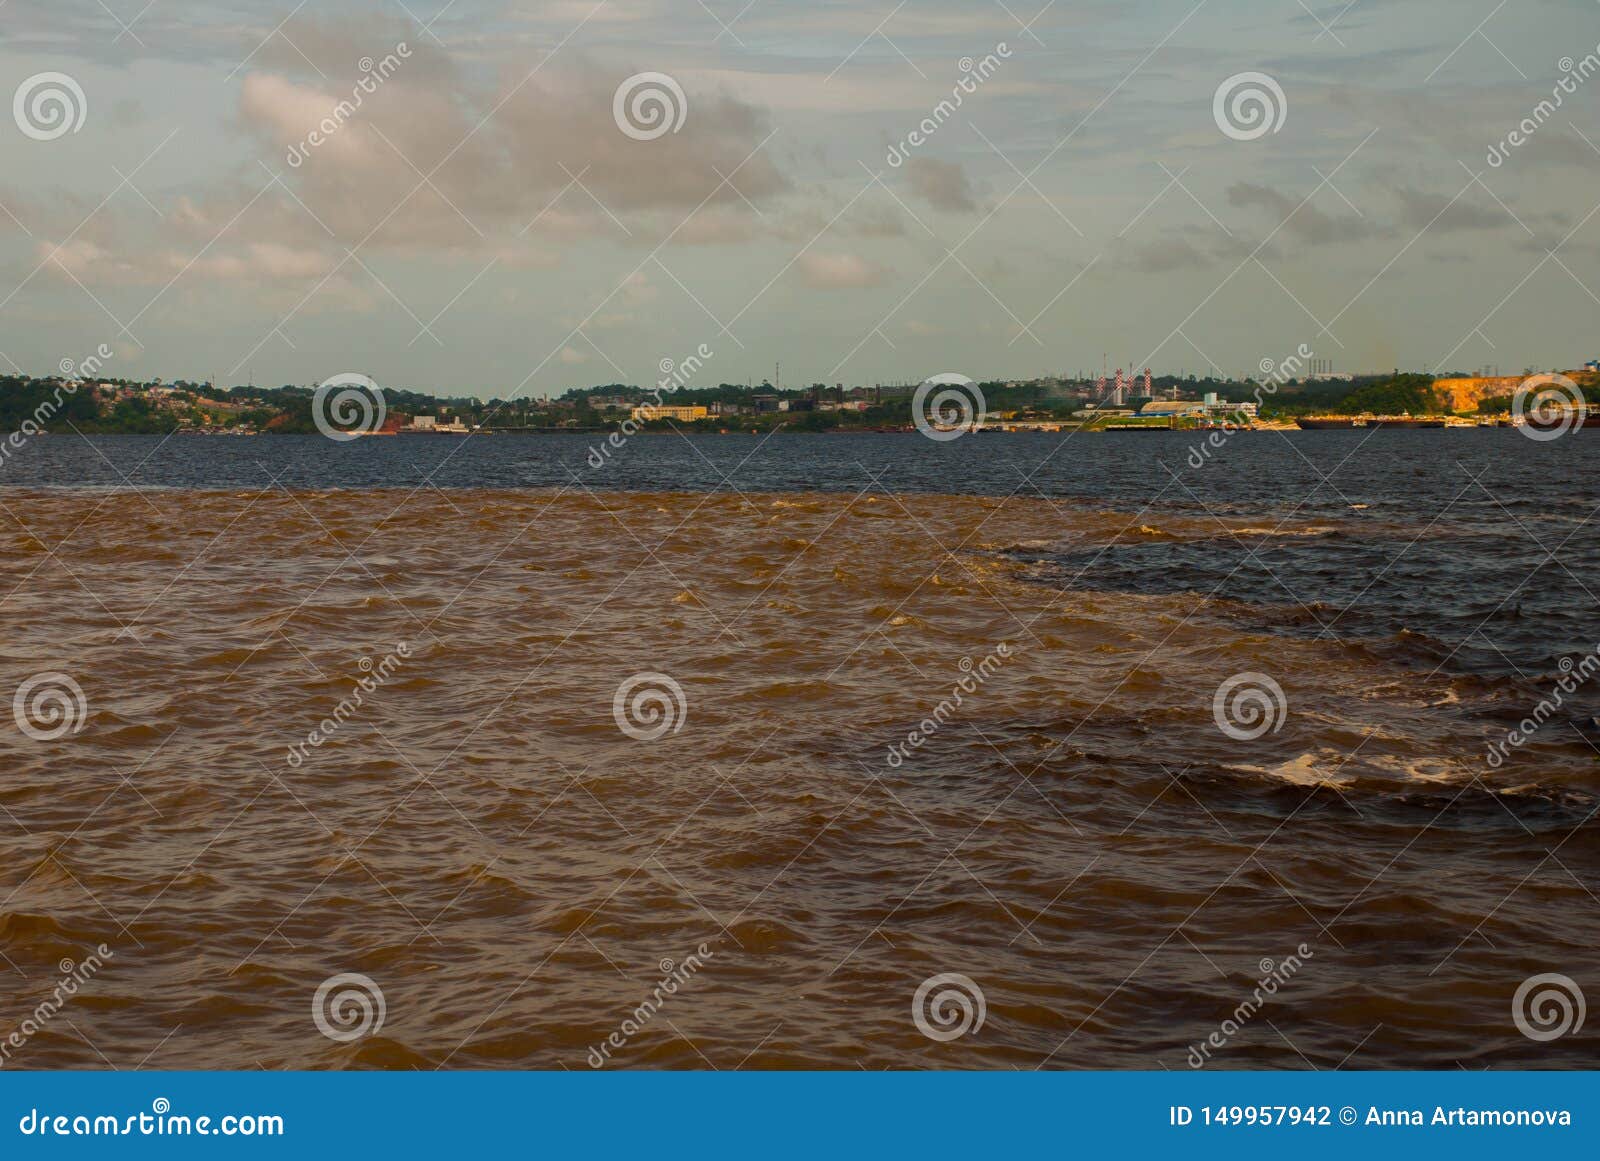 manaus, amazonas, brazil: the merger of the two colored river, rio negro, solimoes